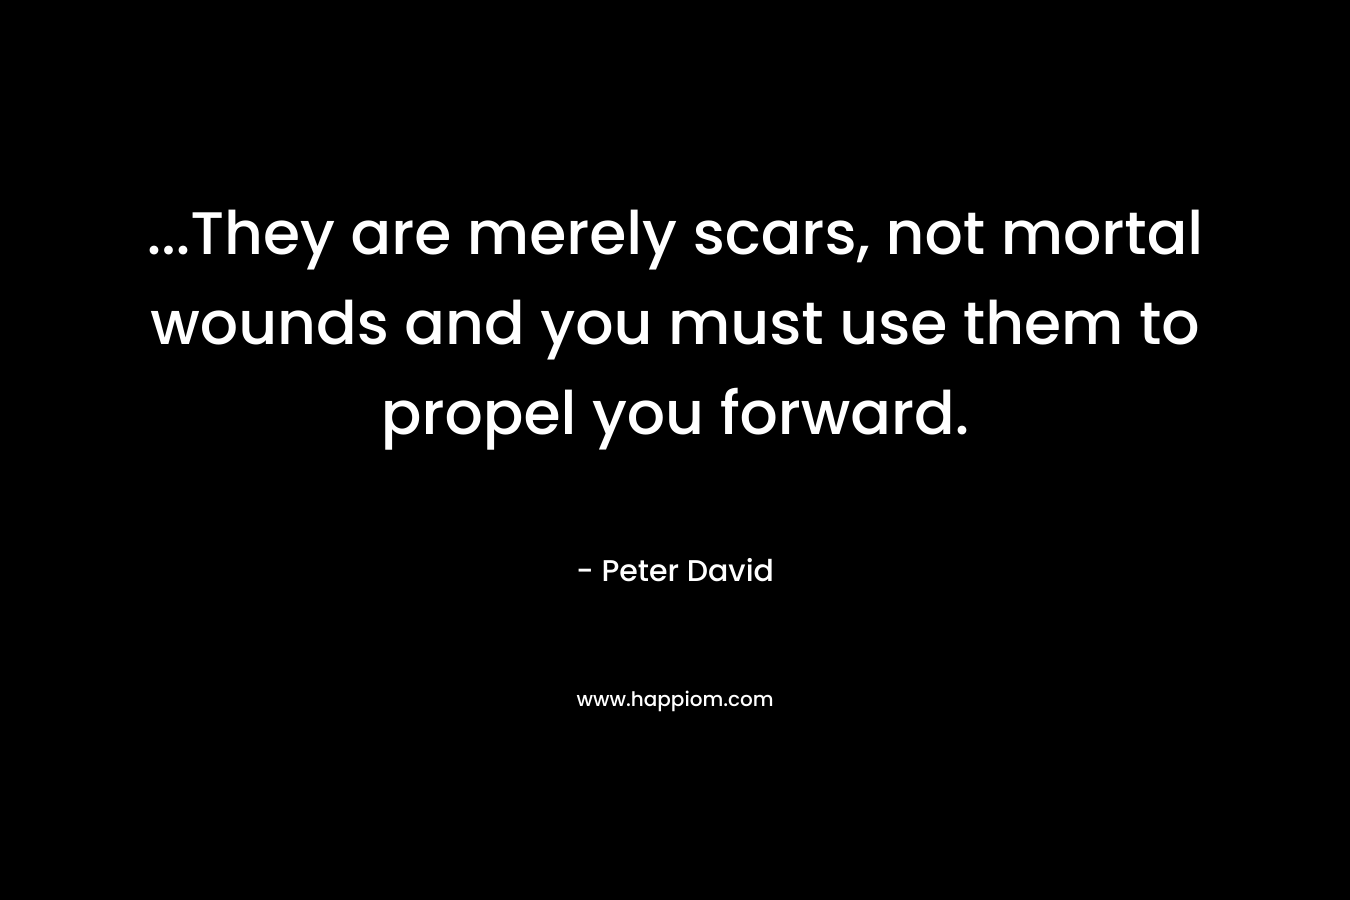 …They are merely scars, not mortal wounds and you must use them to propel you forward. – Peter David